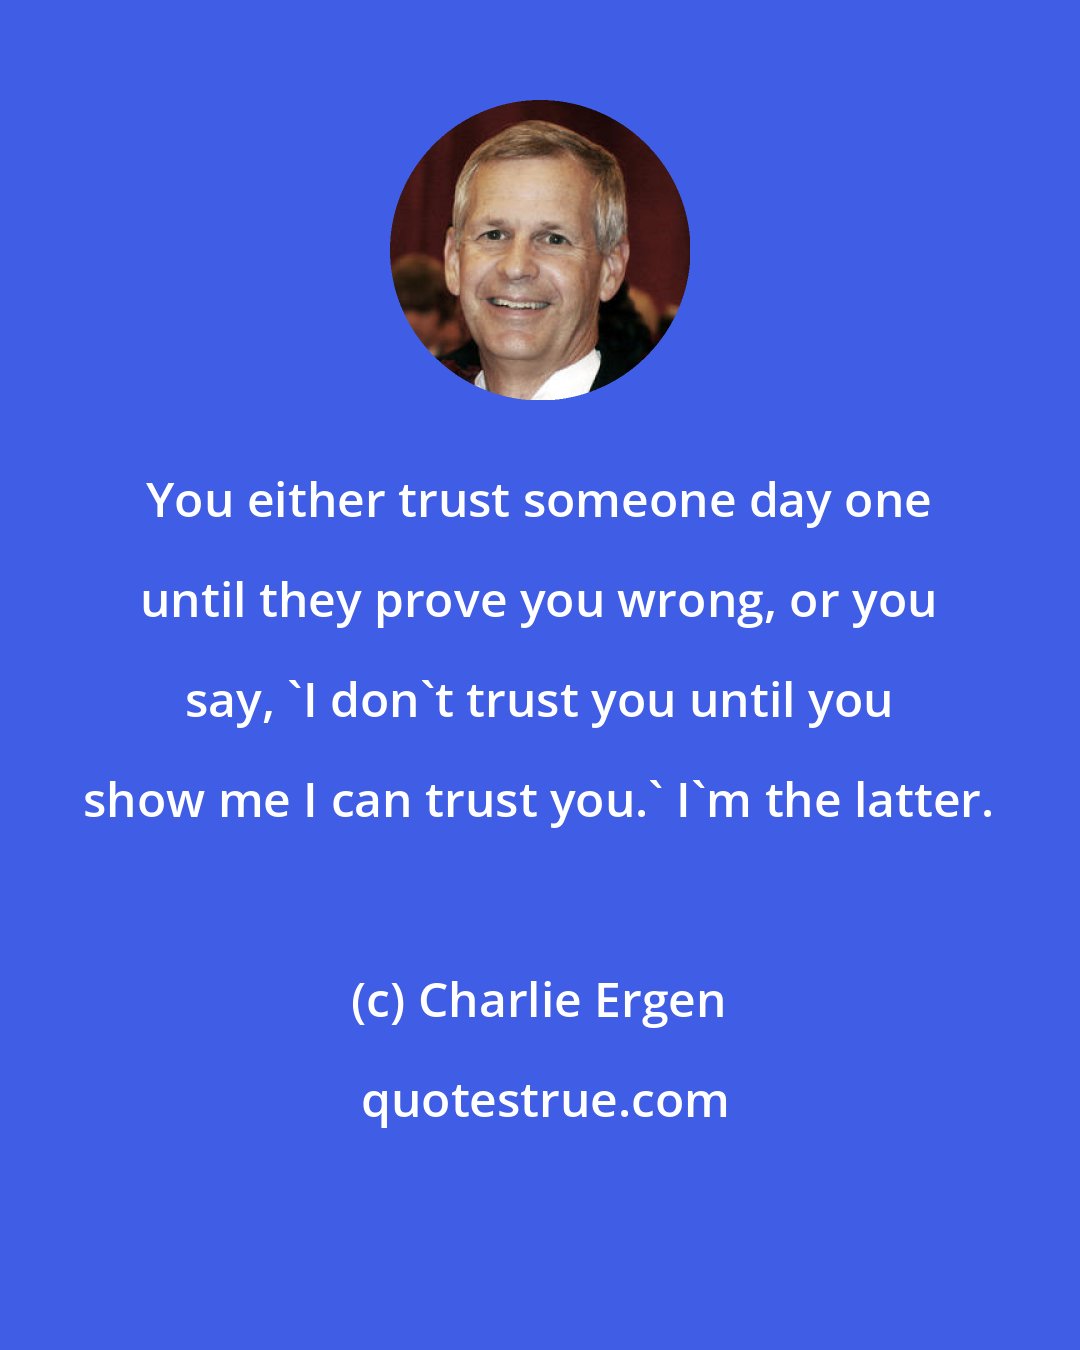 Charlie Ergen: You either trust someone day one until they prove you wrong, or you say, 'I don't trust you until you show me I can trust you.' I'm the latter.